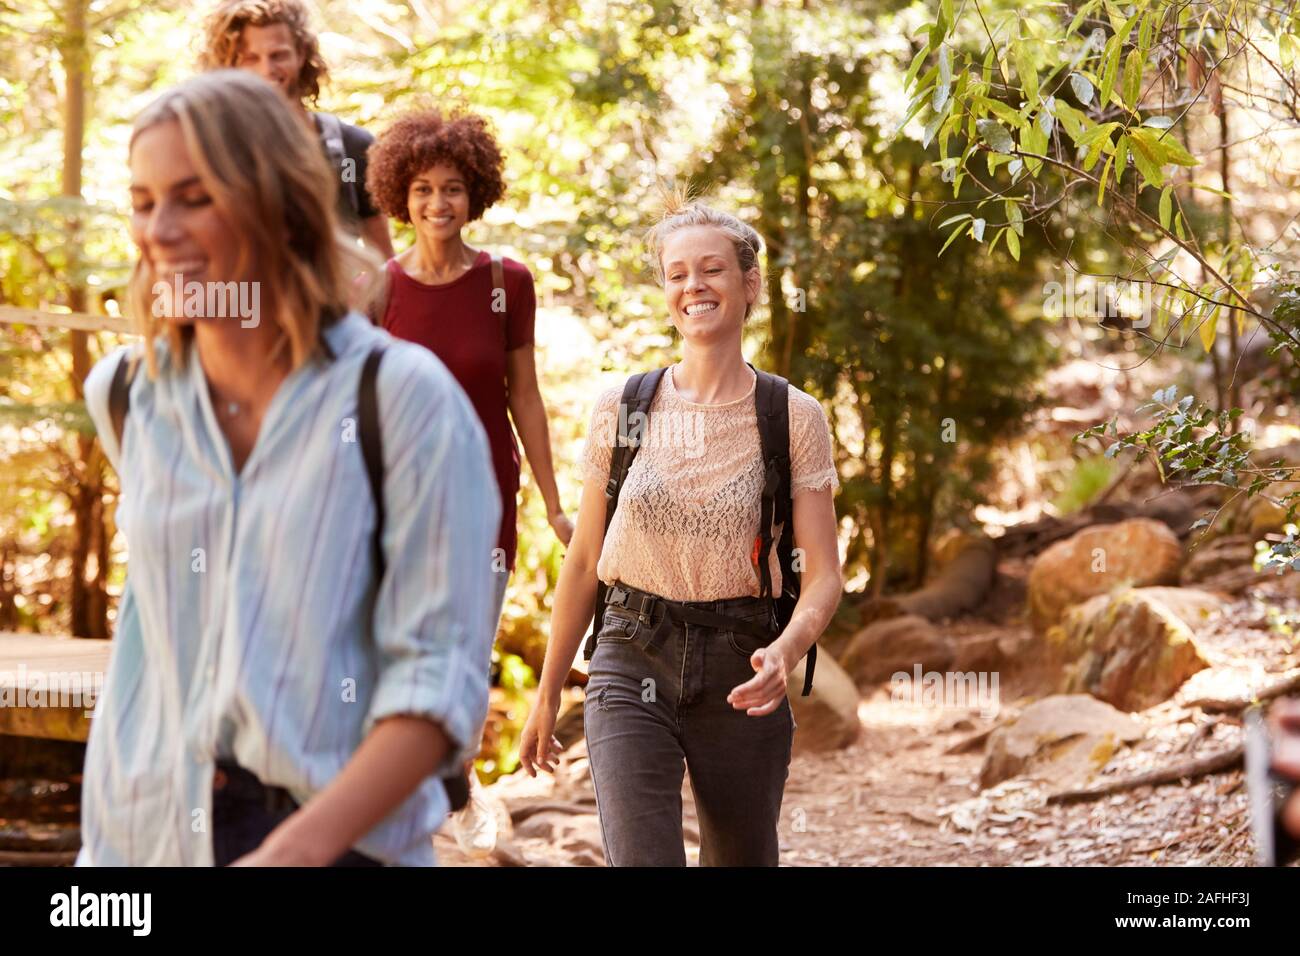 Smiling millennial girlfriends walking together during a hike in a forest, close up Stock Photo